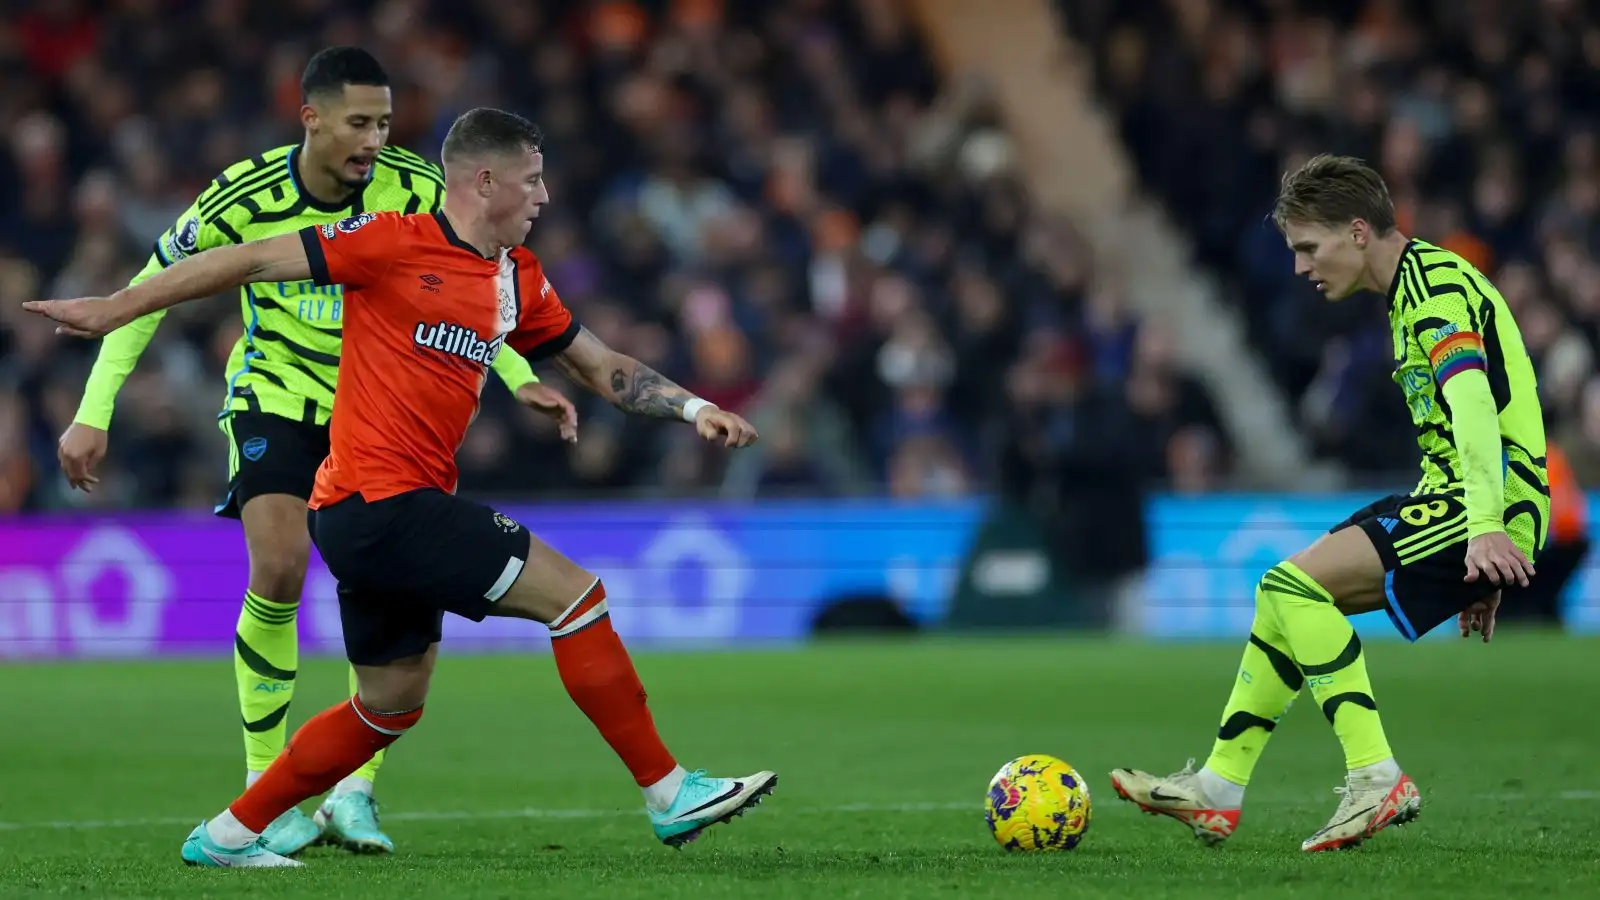 Luton star Barkley reveals Arsenal star who begged him to ‘stop running at me with the ball!’